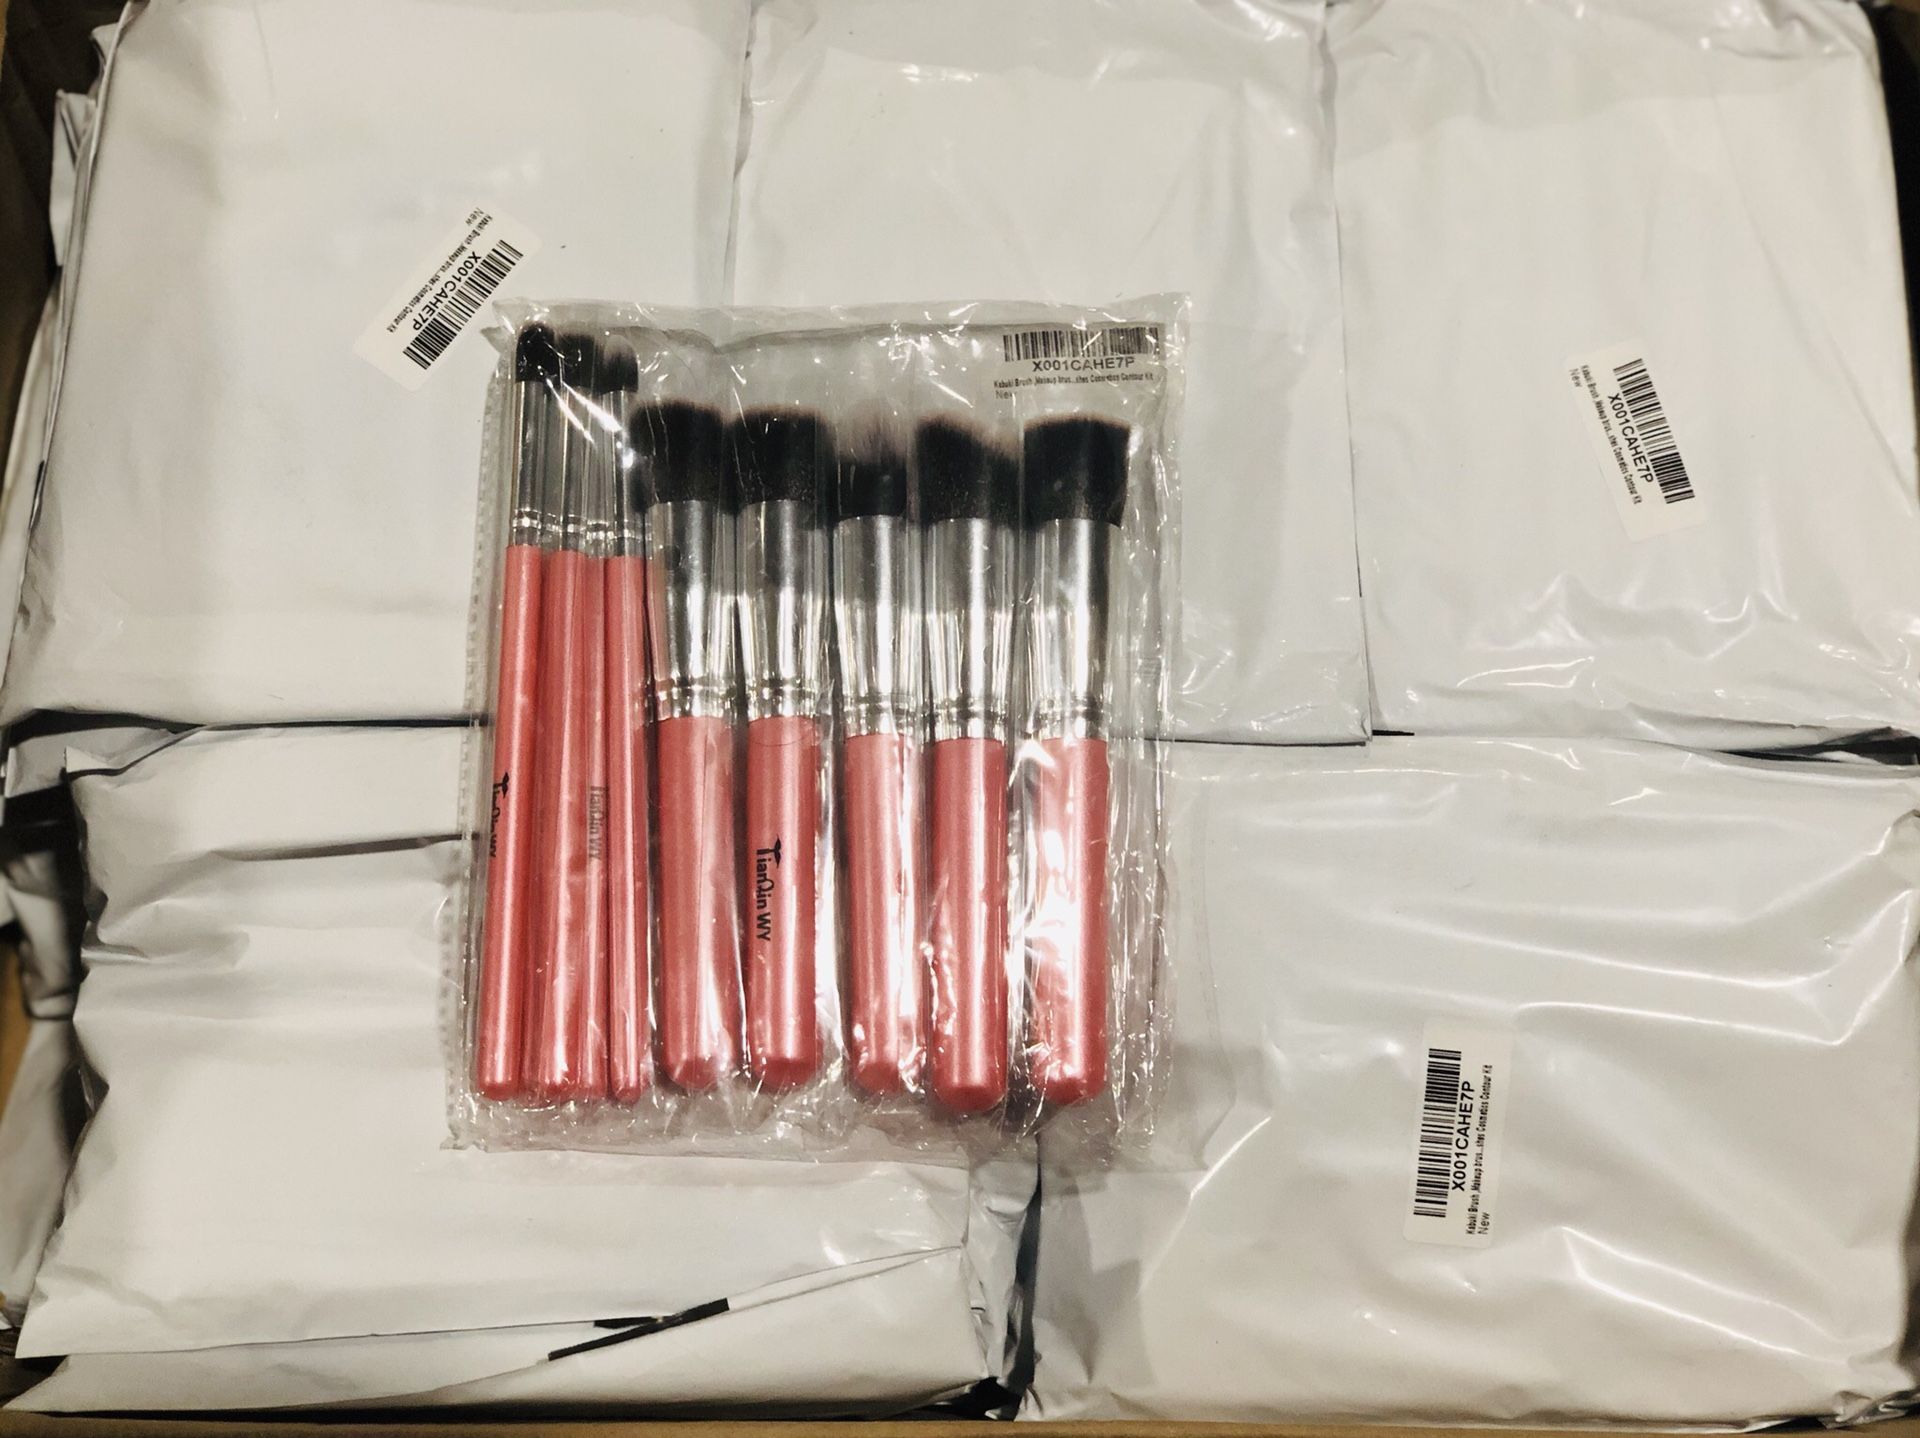 Brand New Lot - On Sale Today ONLY! - 95 Kabuki Makeup Brush Kits - 8 and 10 piece Brush Sets - Black/Pink/Natural - Individually Packaged - NEW!!!